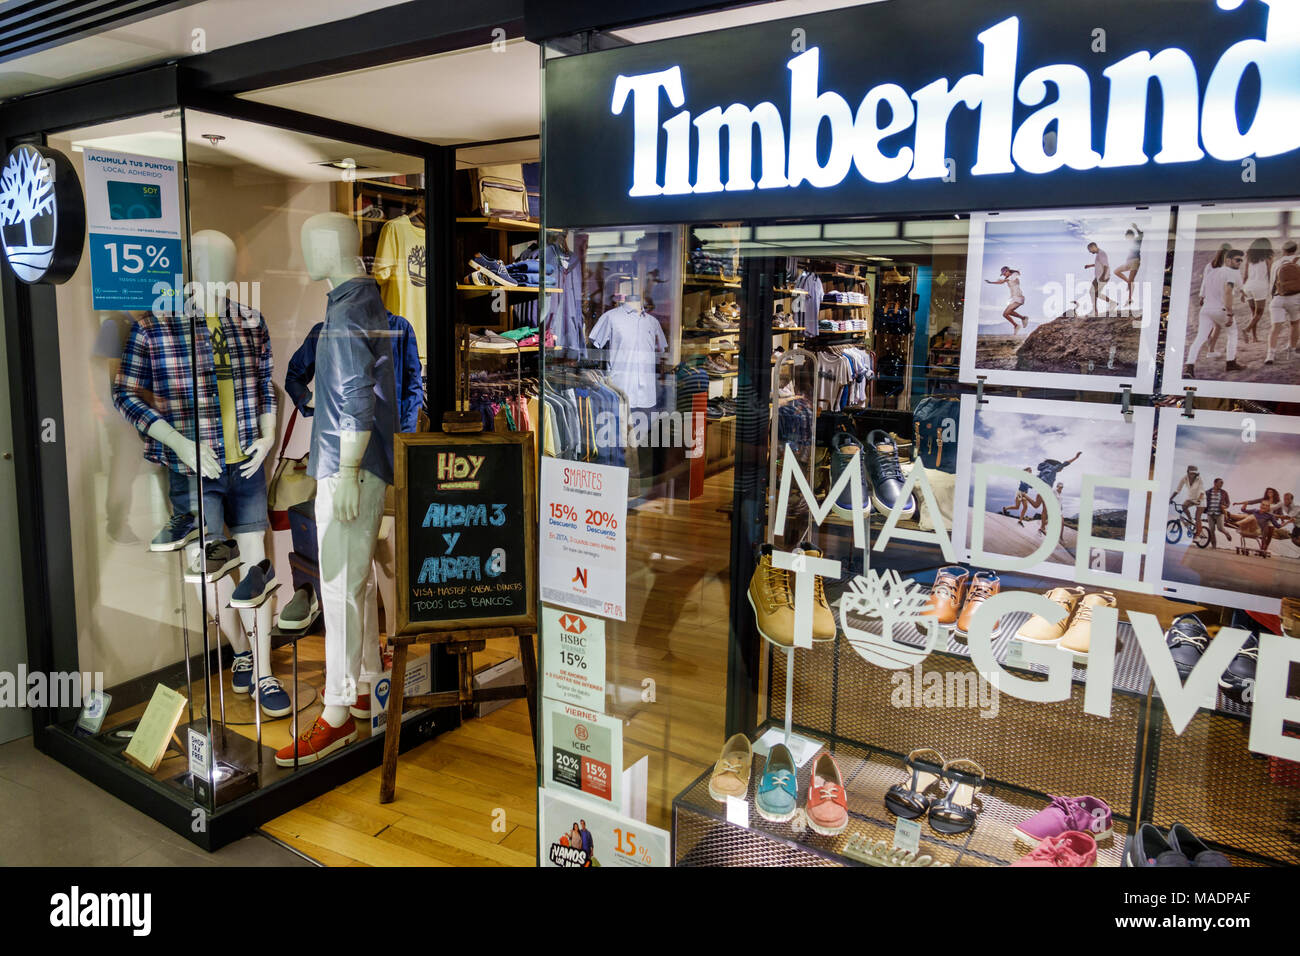 Buenos Aires Argentina,Recoleta mall,Timberland,store,American,window display,clothing,shoes,mannequin,Hispanic,ARG171130271 Stock Photo